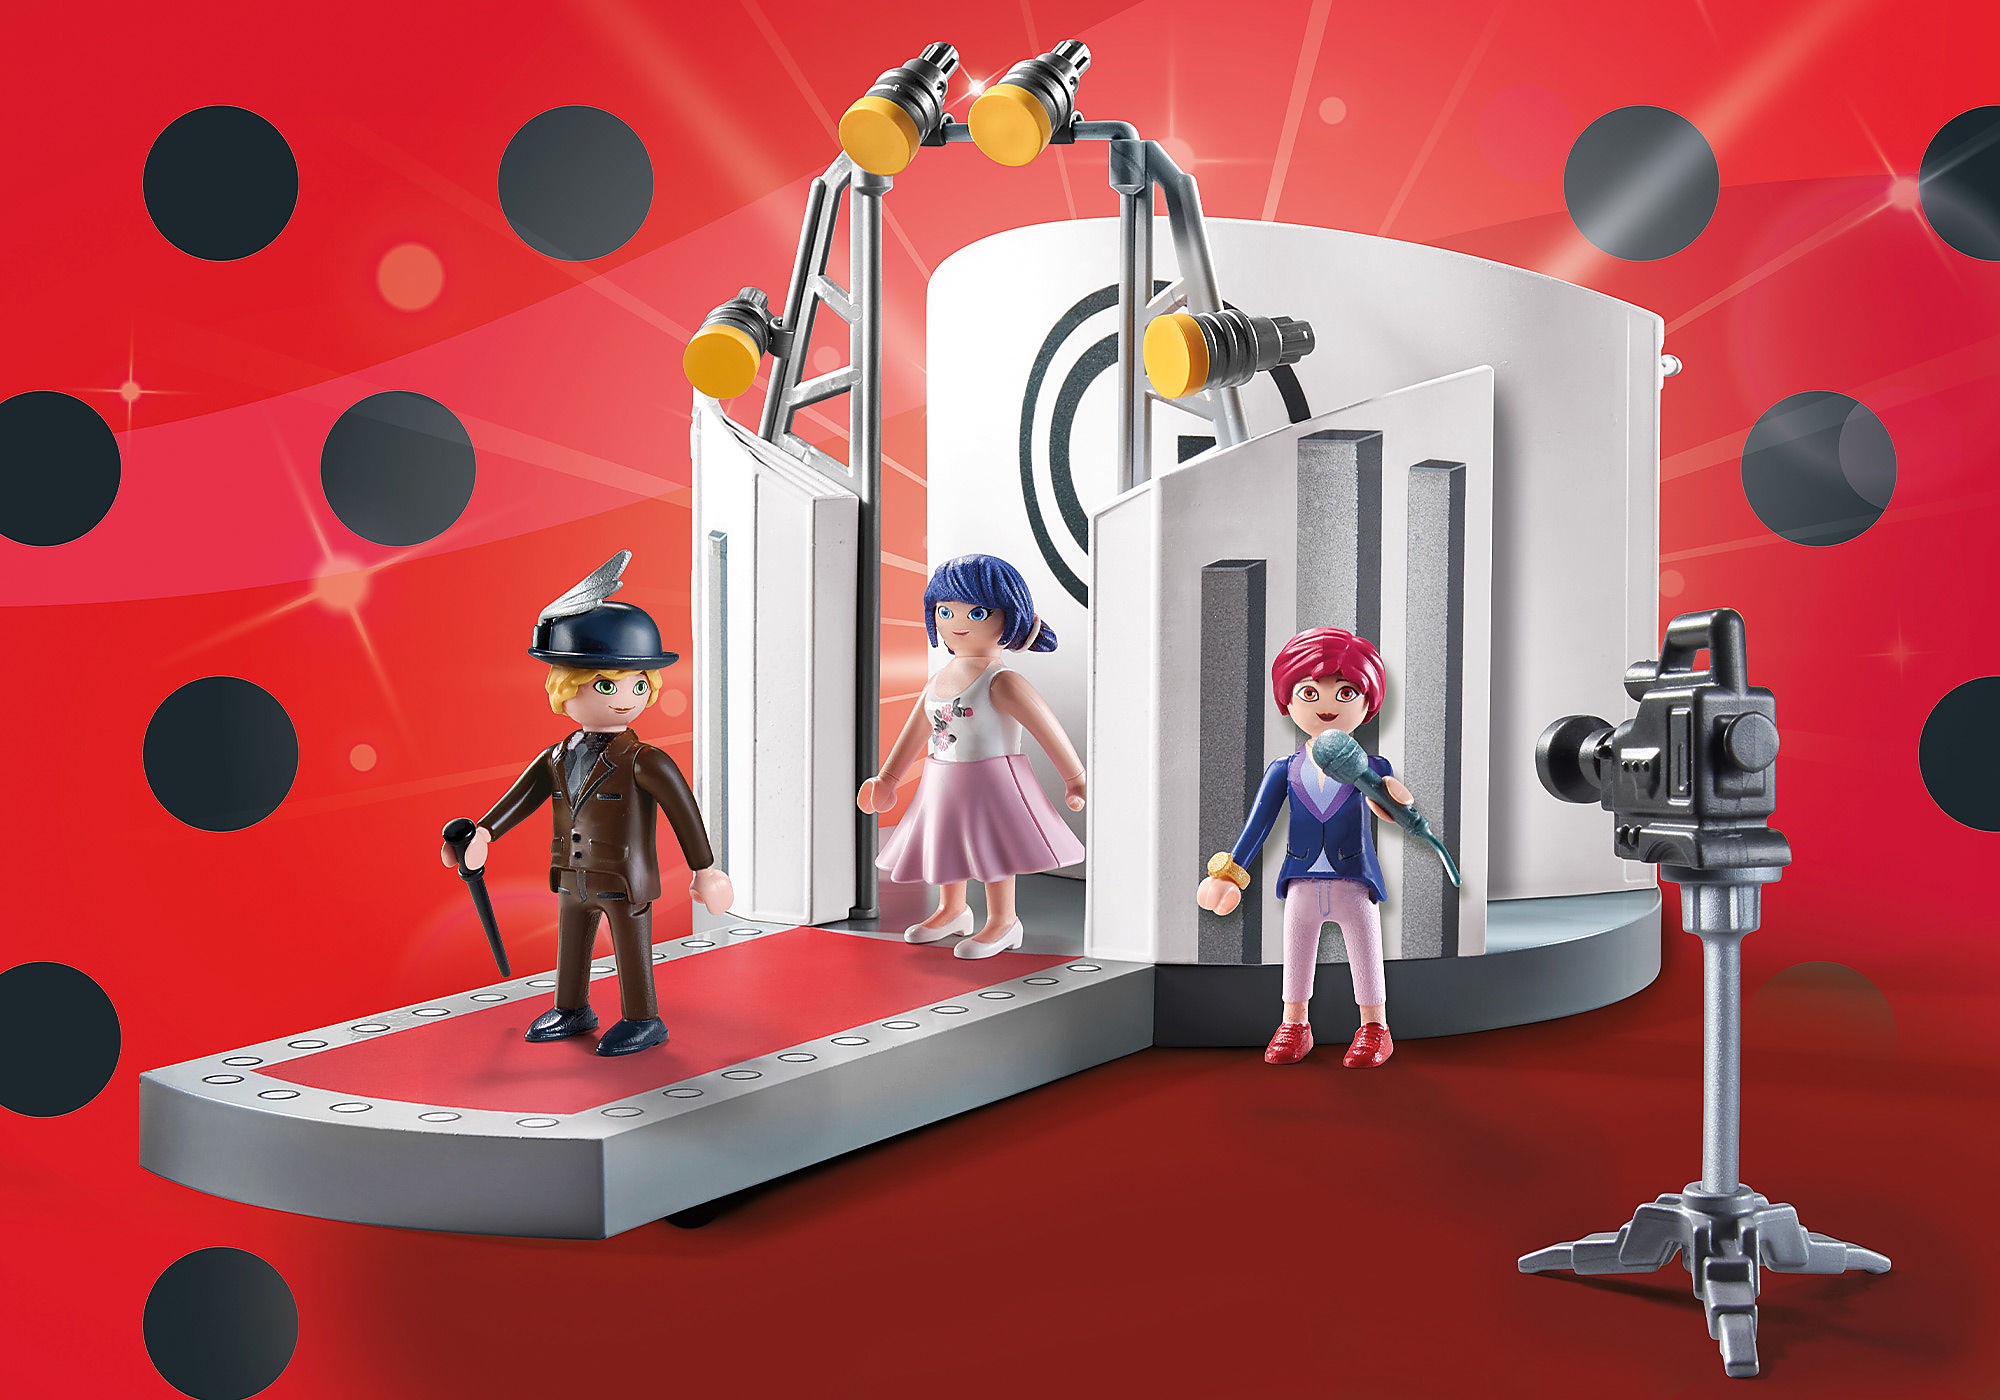 Miraculous Characters to Appear in PLAYMOBIL Toys - The Licensing Letter